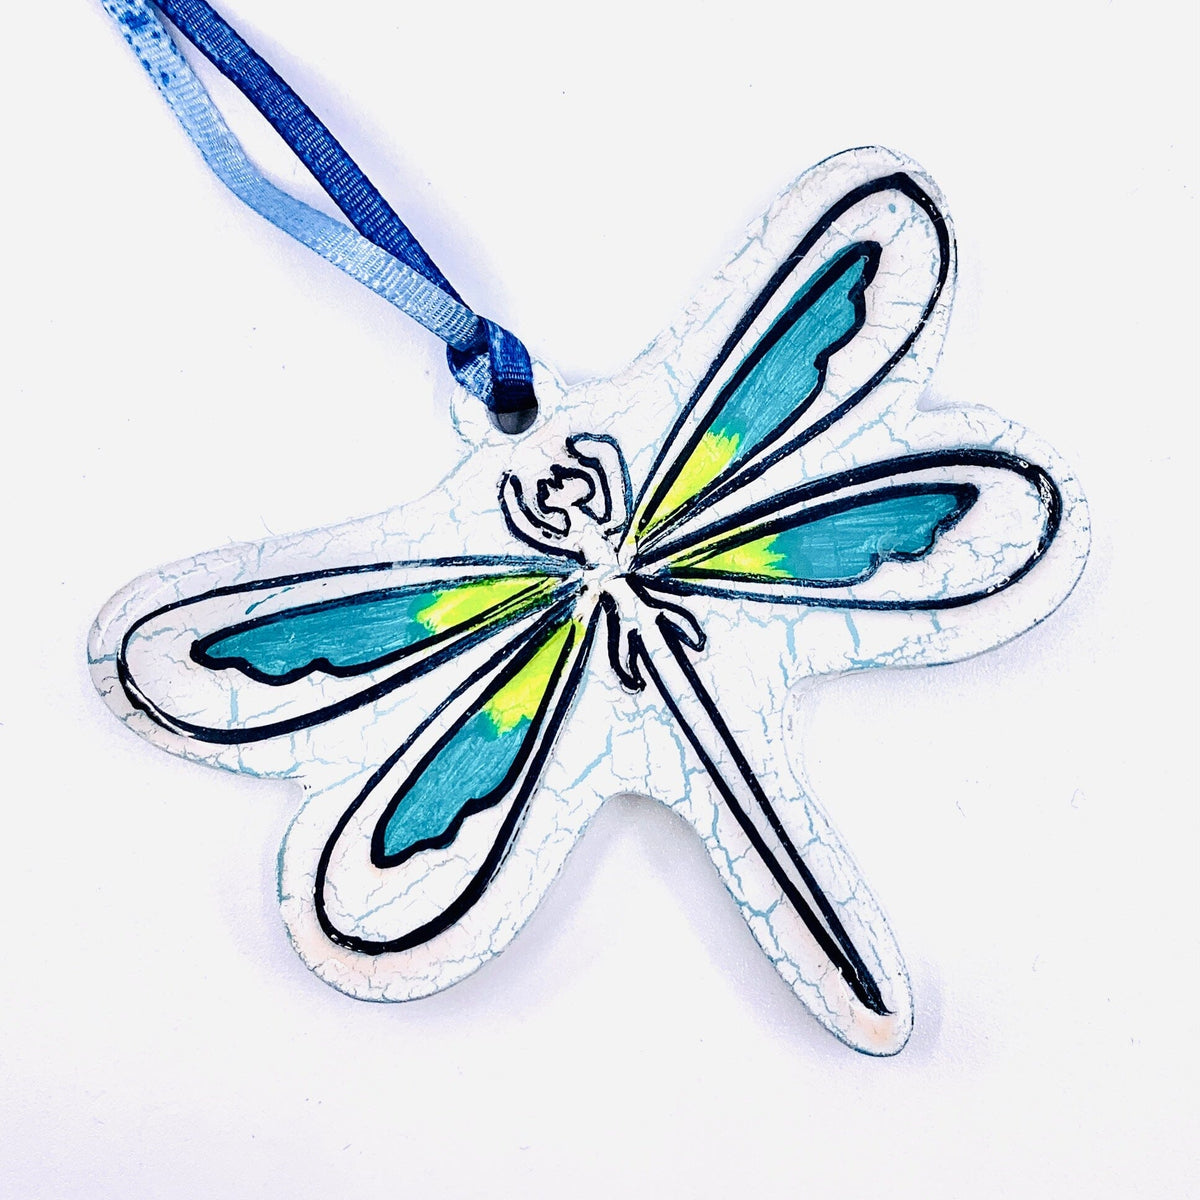 Recycled Wood Ornament, Dragonfly Ornament Pam Peana 